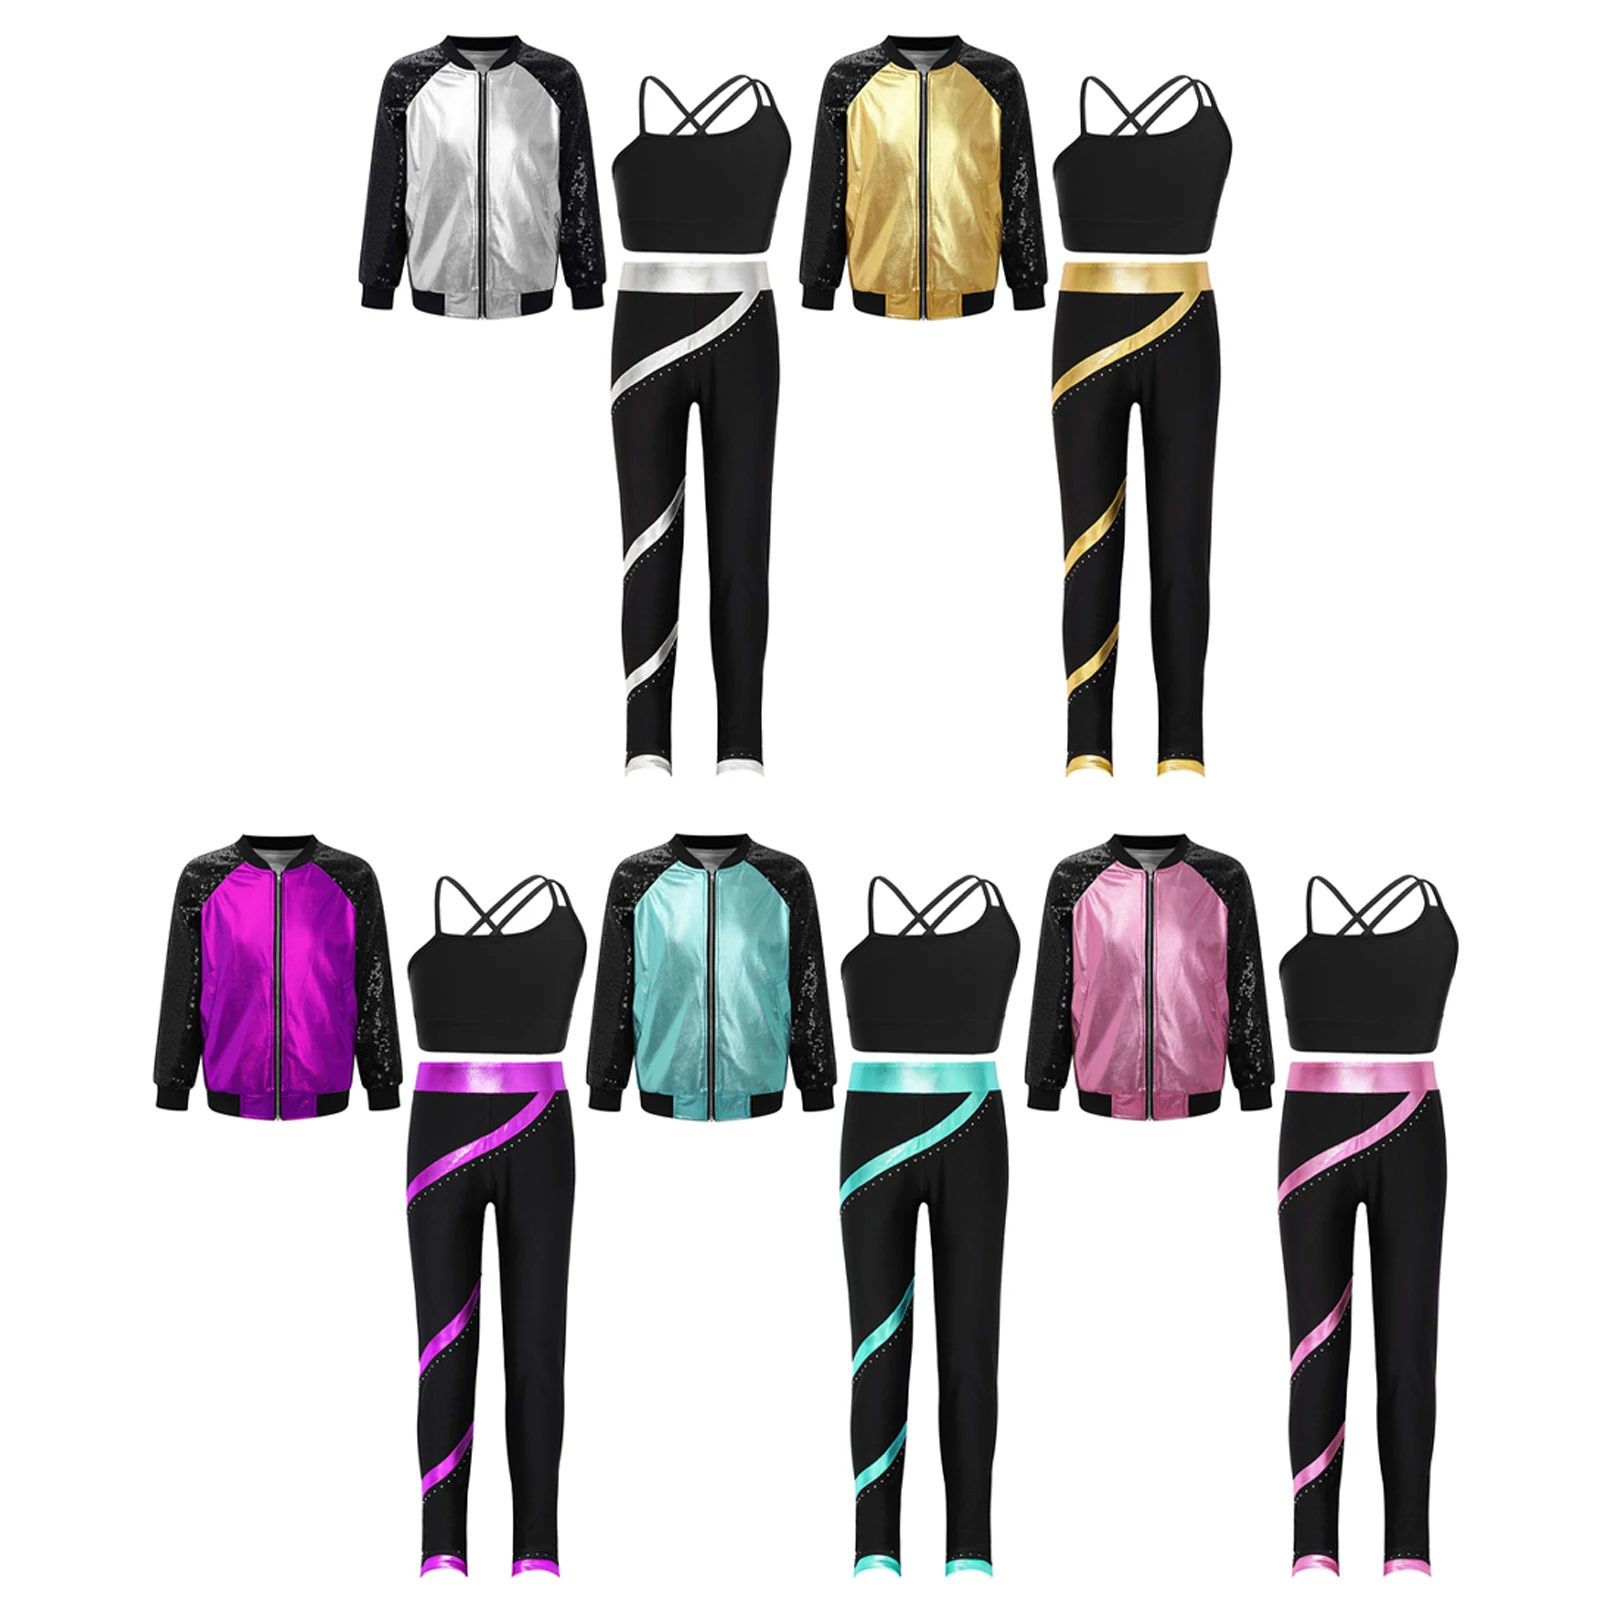 

TiaoBug Kids Girls Sports Set 6 to 14 Years Asymmetrical Straps Vest with Metallic Zipper Jacket High Waisted Patchwork Pants